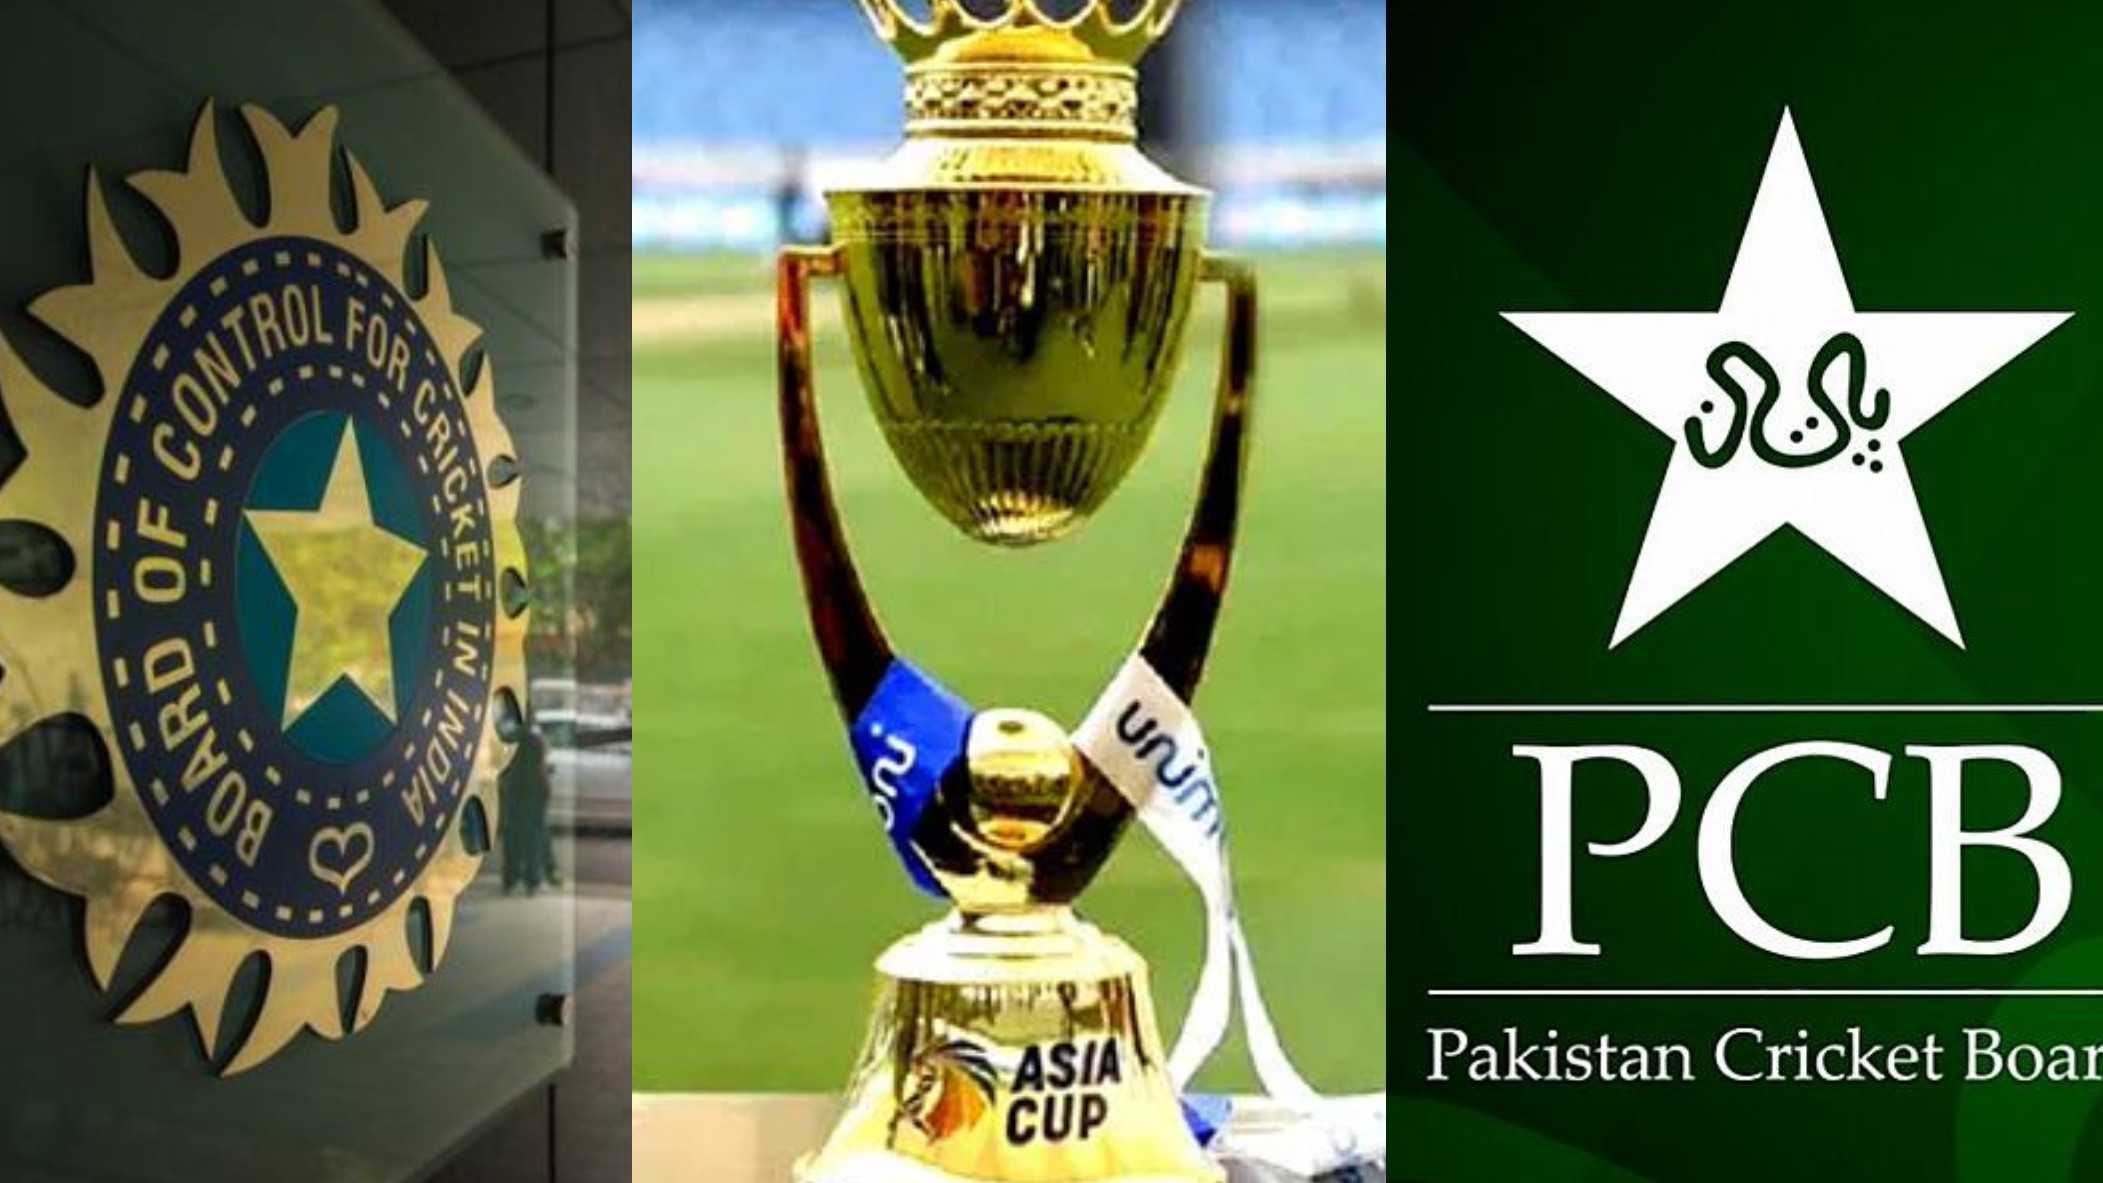 Travel to Pakistan for Asia Cup in 2023 on agenda of BCCI's Annual General  Meeting (AGM)